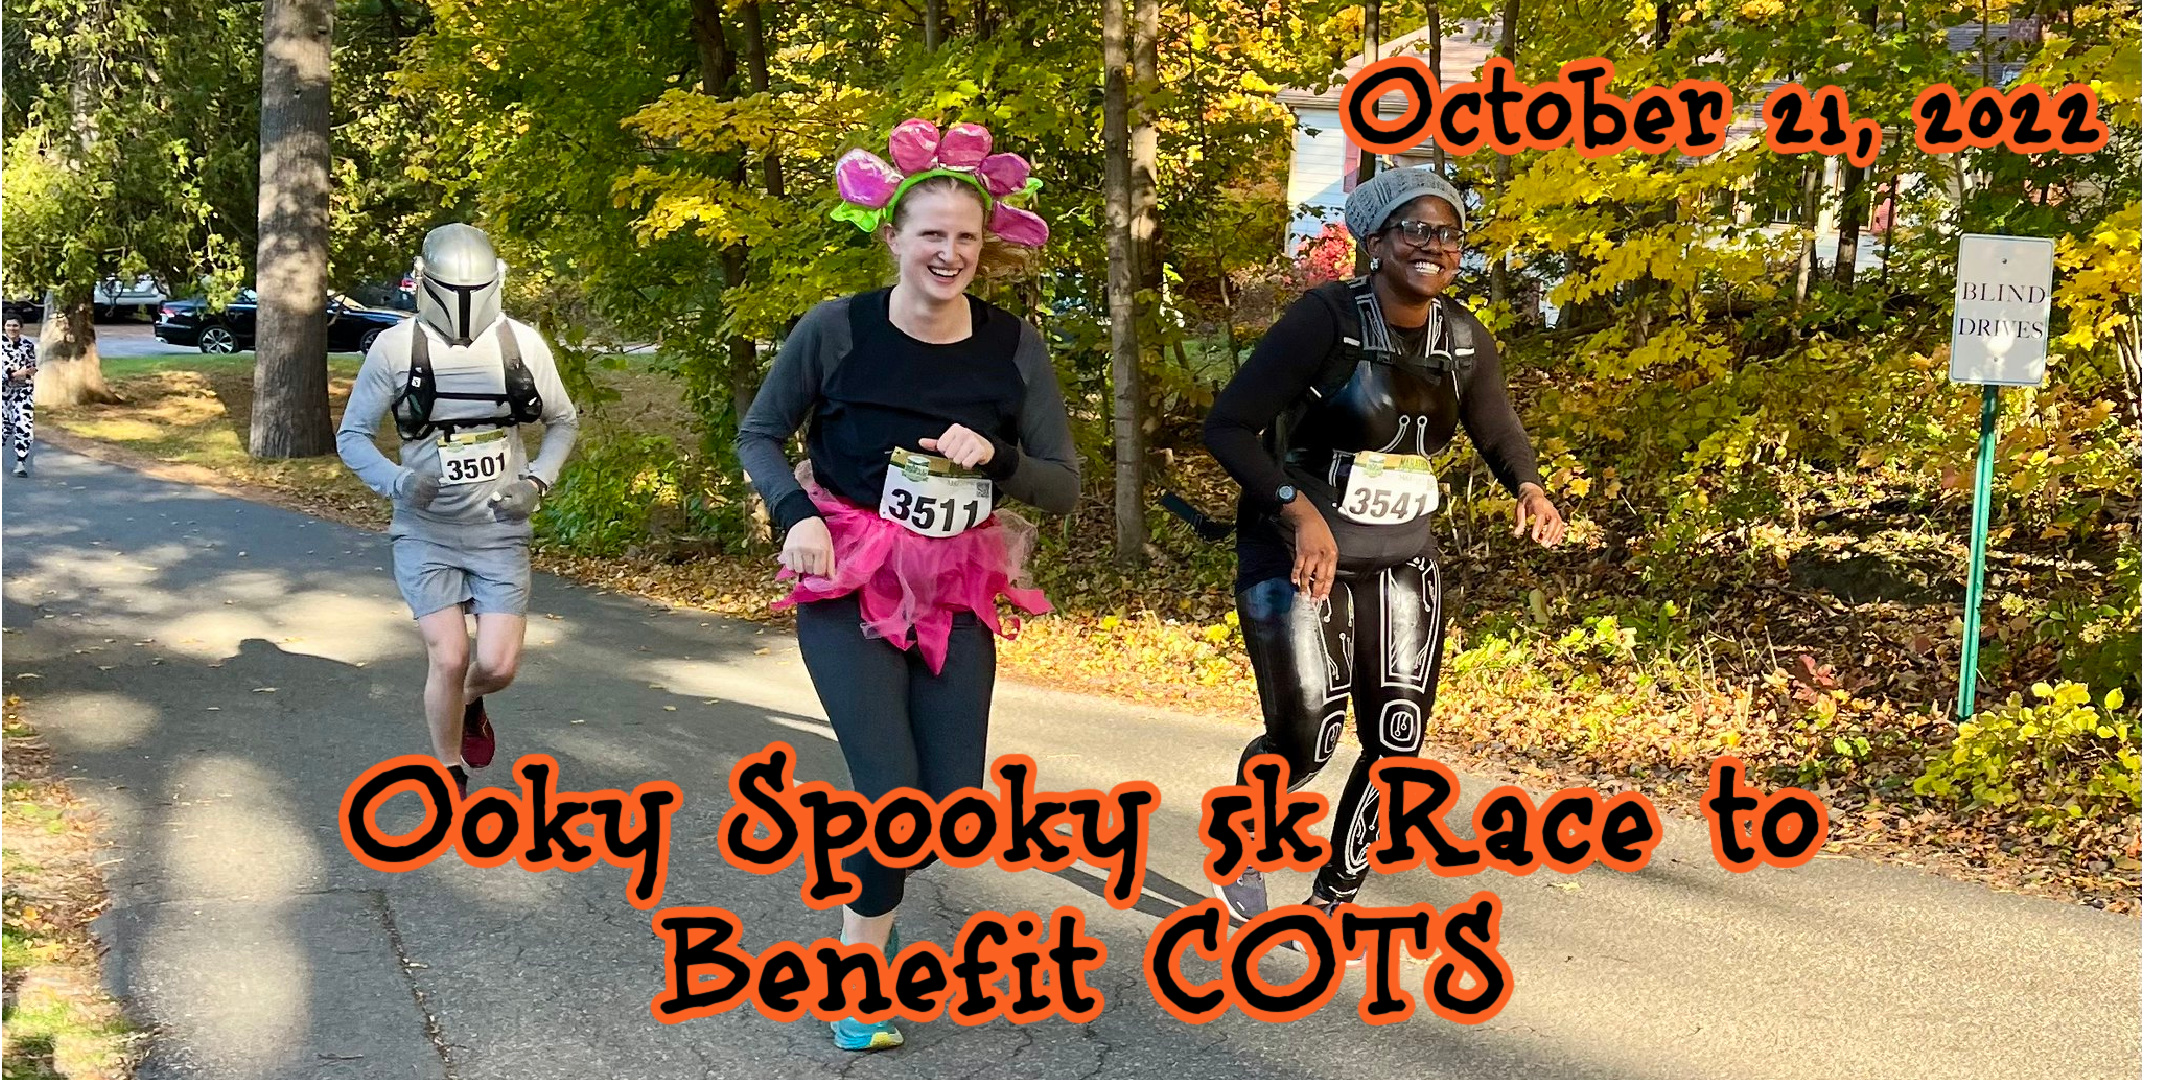 A Mandalorian, a flower, and a skeleton run in the 2022 Ooky Spooky 5K